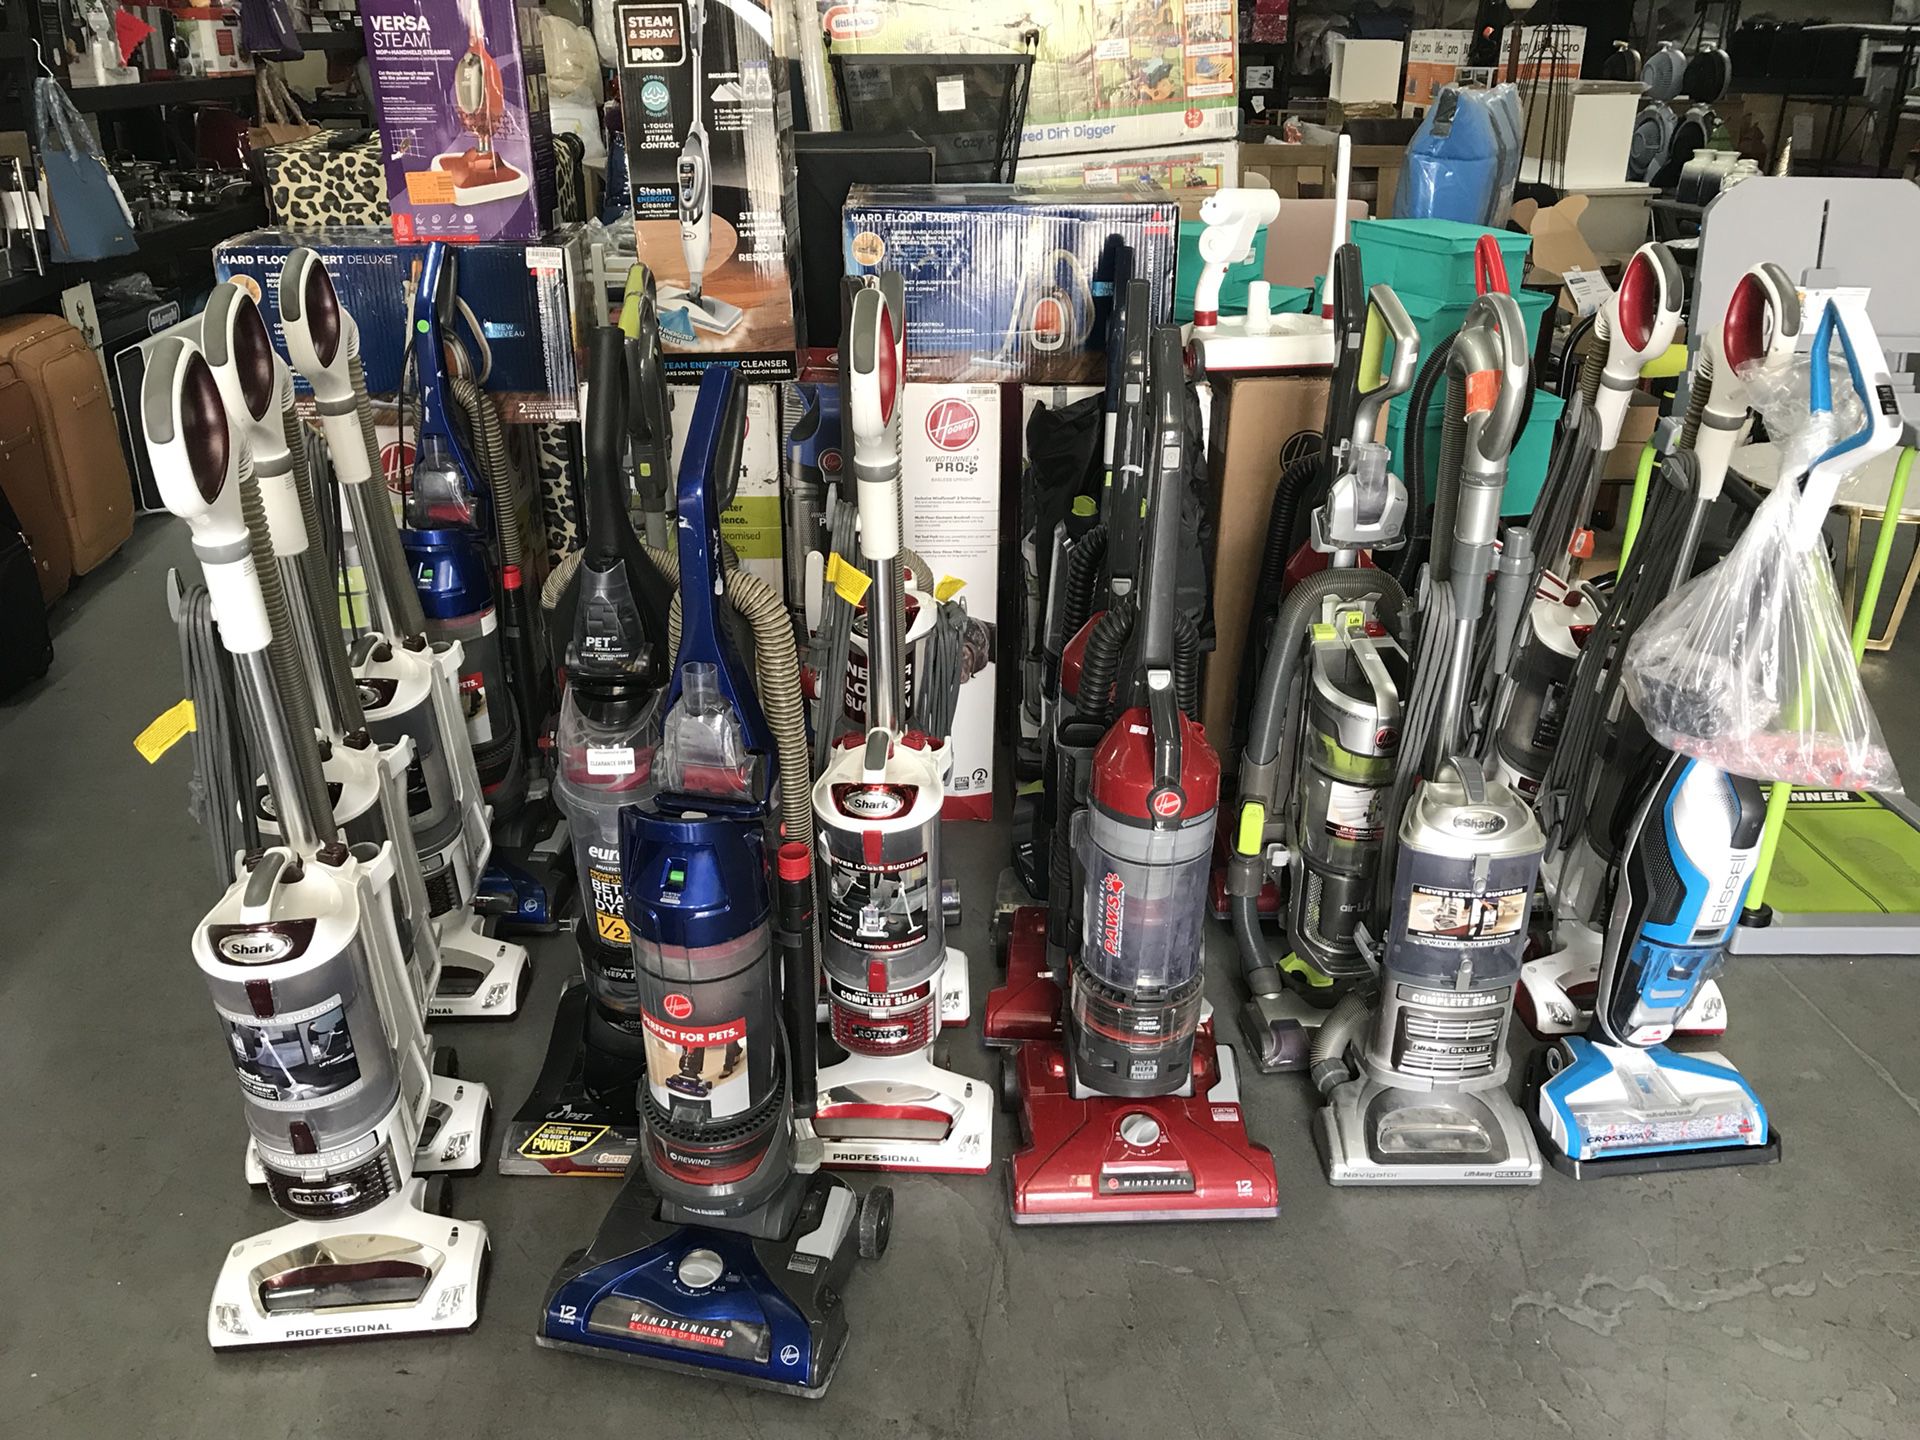 VACUUM SALE !!!! USED, STORE DISPLAY & NEW IN BOX. Used Hoover's $35 New in in box Hoovers starting from $70 to $90 Bissell $150 Dyson store demo $